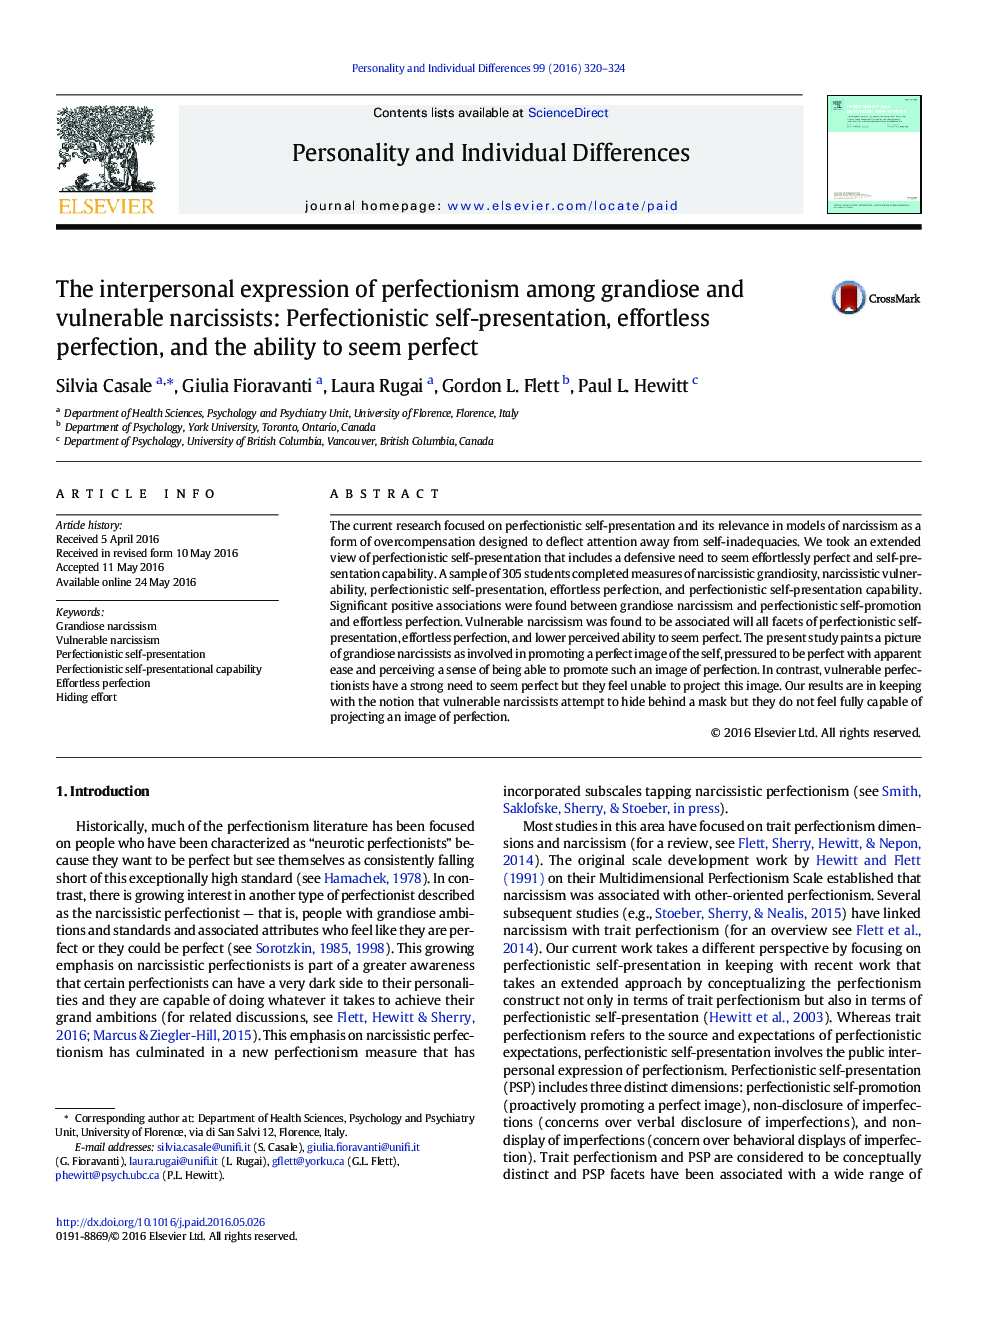 The interpersonal expression of perfectionism among grandiose and vulnerable narcissists: Perfectionistic self-presentation, effortless perfection, and the ability to seem perfect